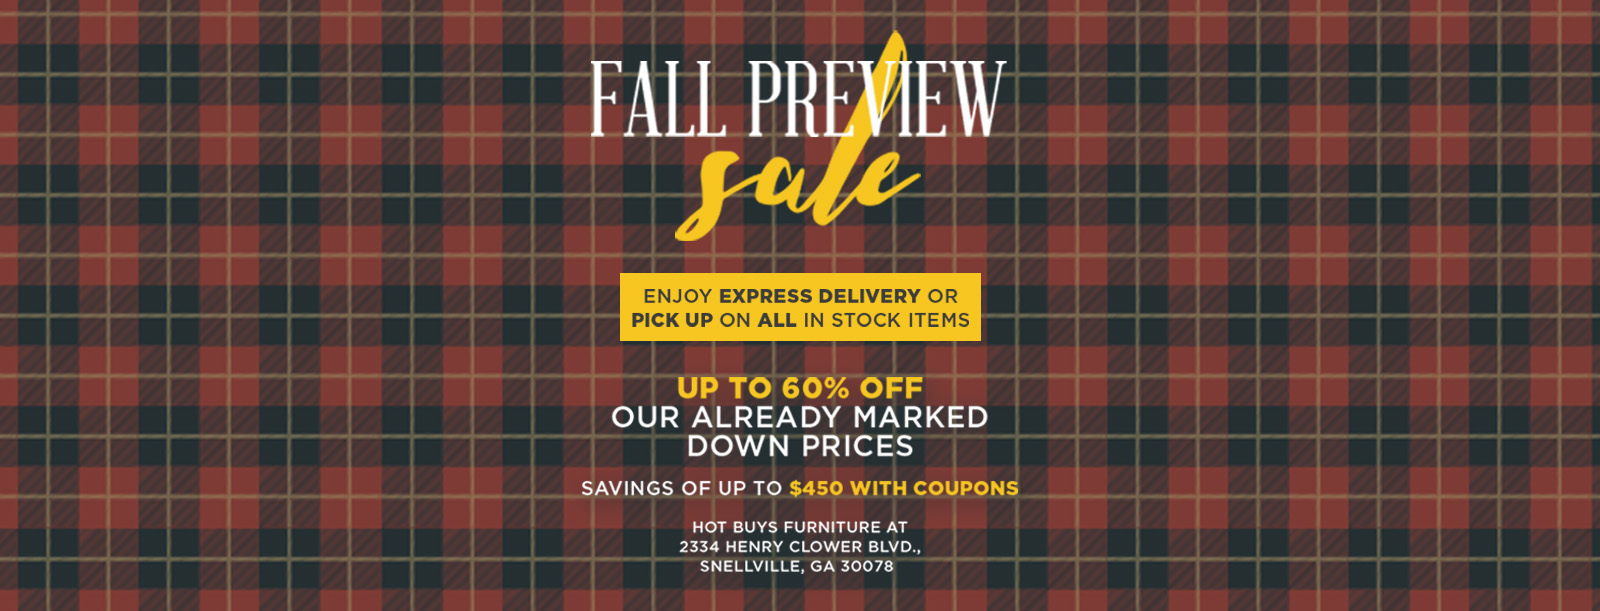 Fall preview sale